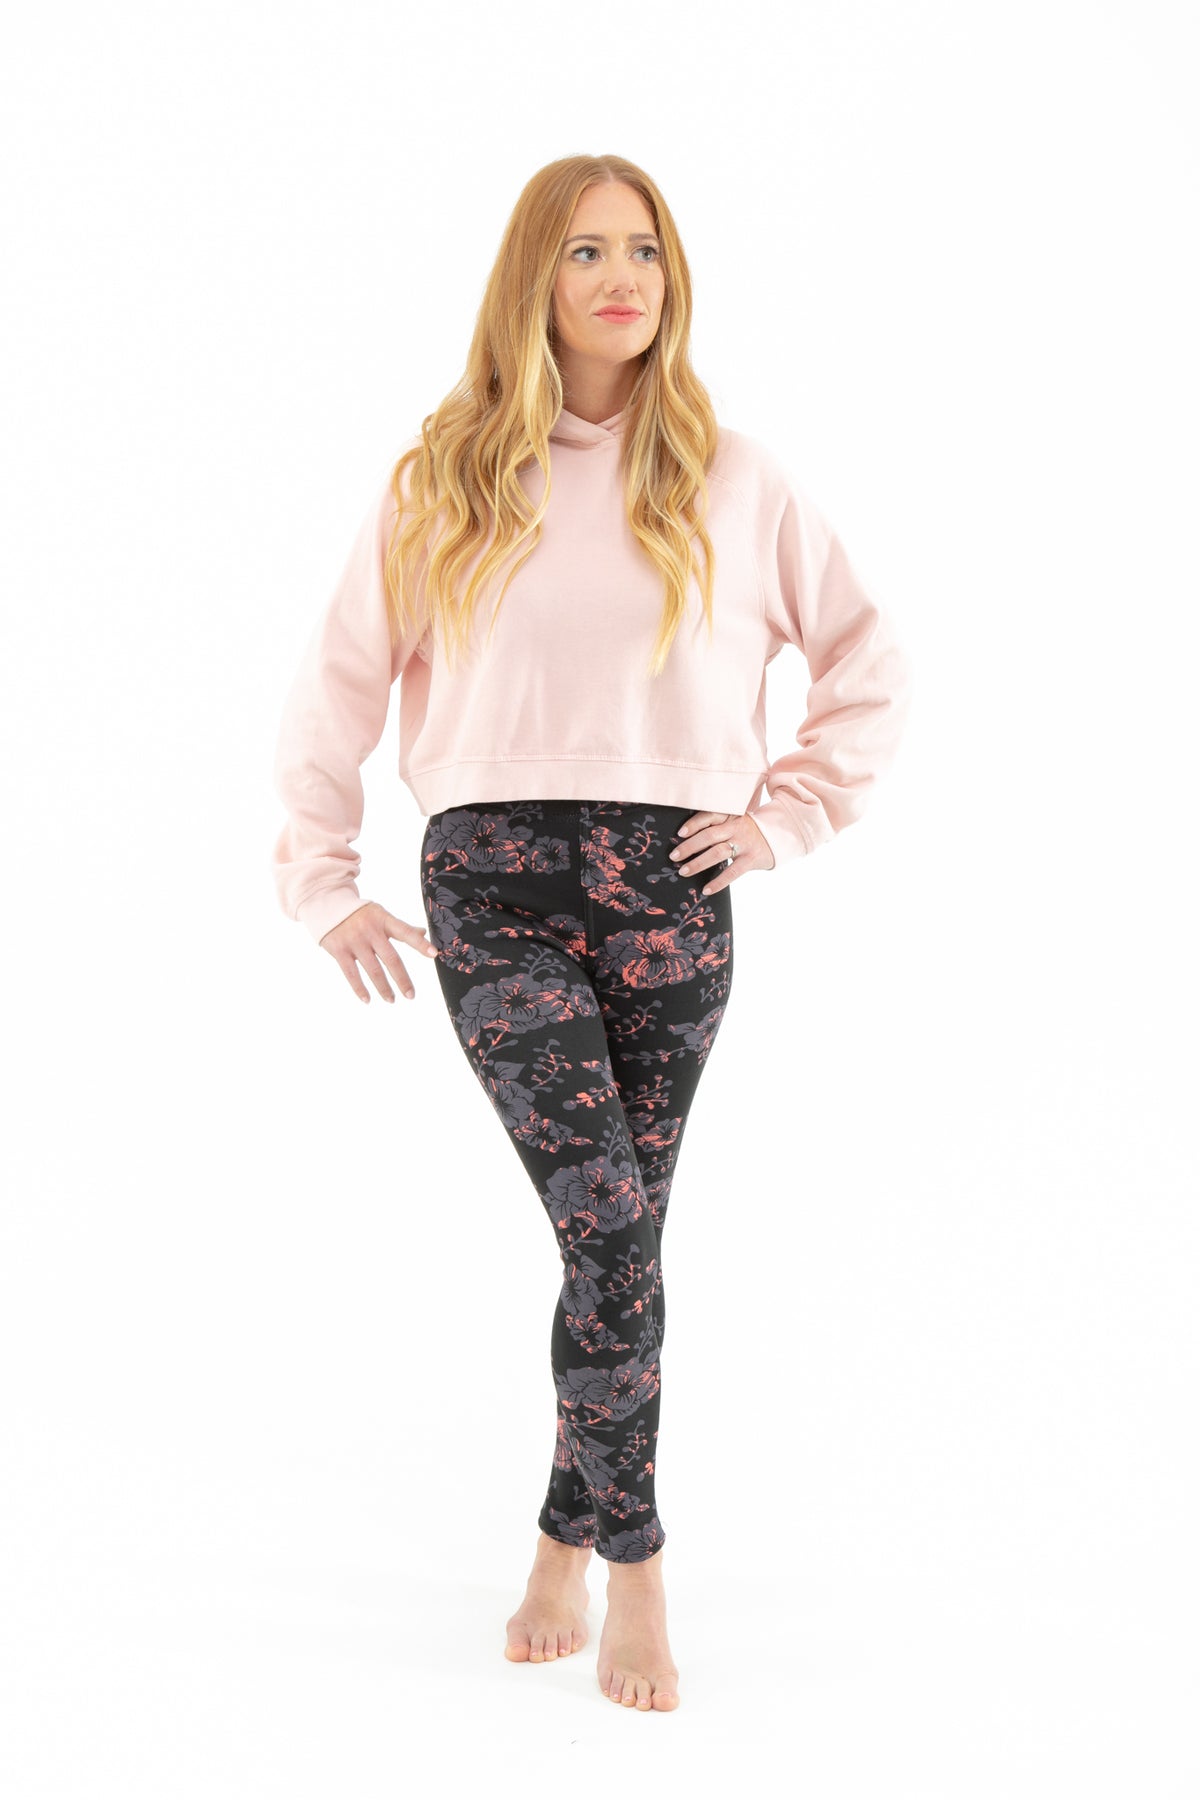 Fur-Lined Leggings Available in XS-S – Just Cozy